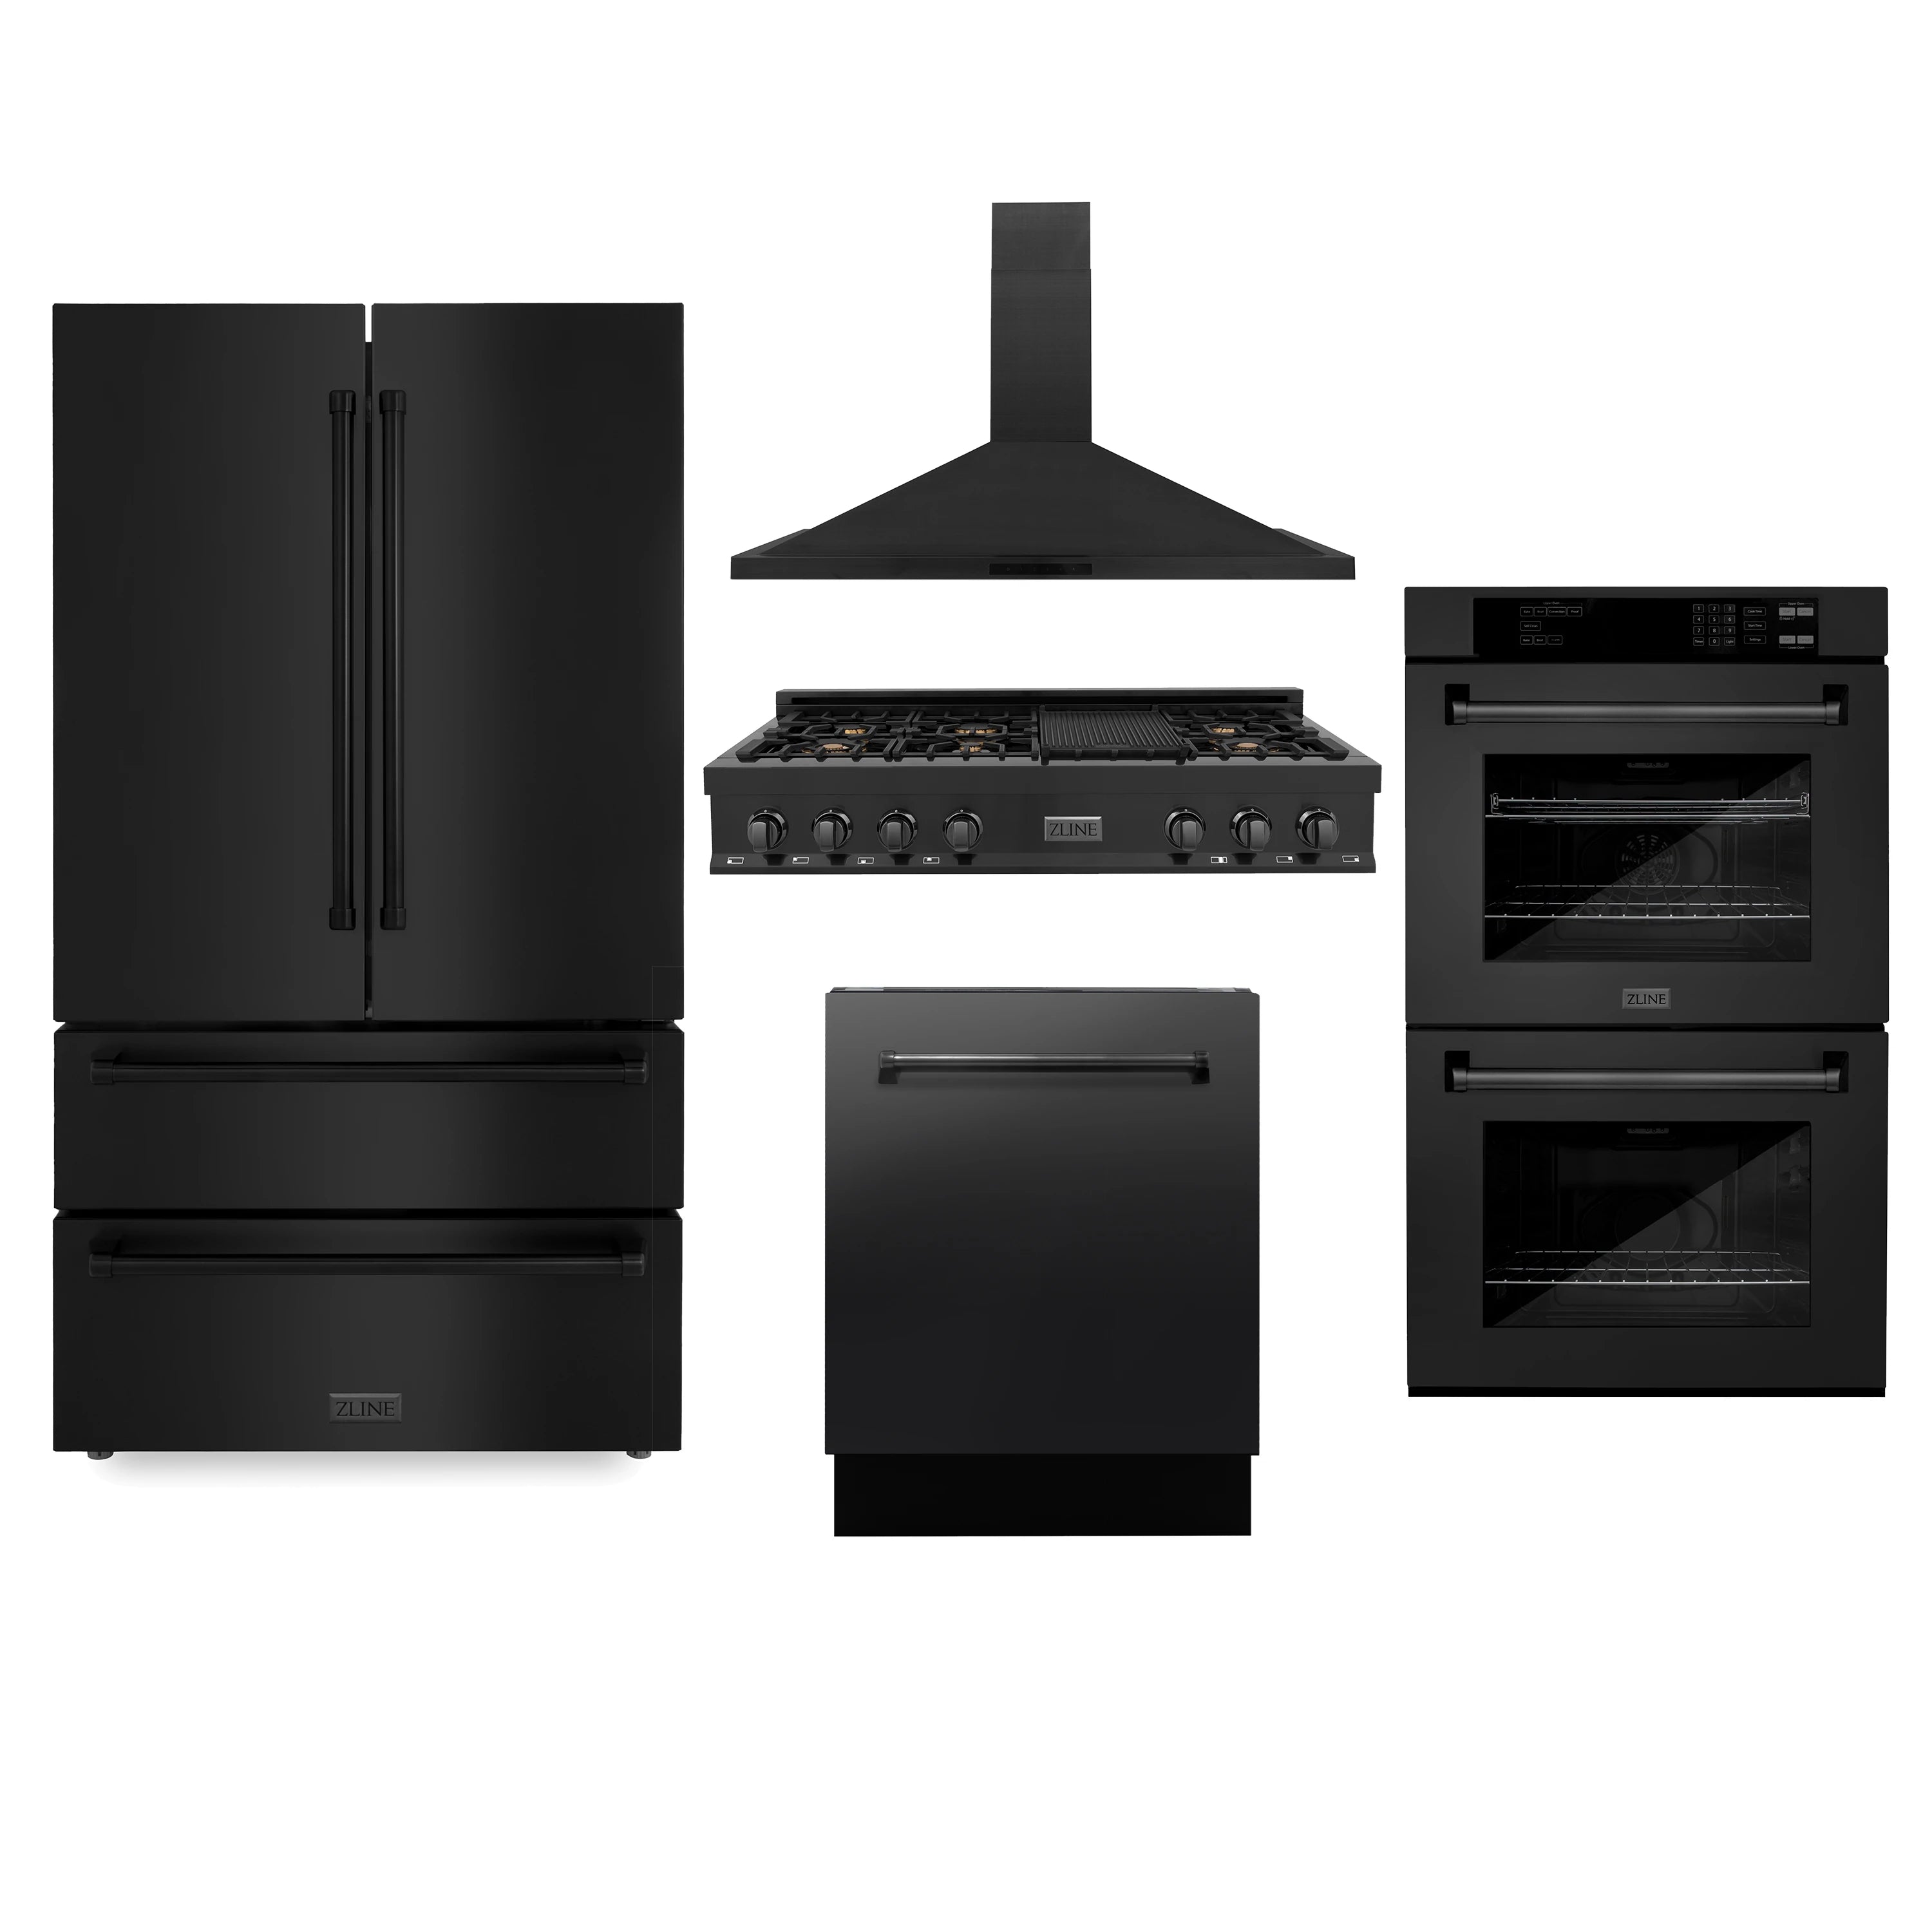 ZLINE 5-Piece Appliance Package - 48-Inch Rangetop with Brass Burners, Refrigerator, 30-Inch Electric Double Wall Oven, 3-Rack Dishwasher, and Convertible Wall Mount Hood in Black Stainless Steel (5KPR-RTBRH48-AWDDWV)